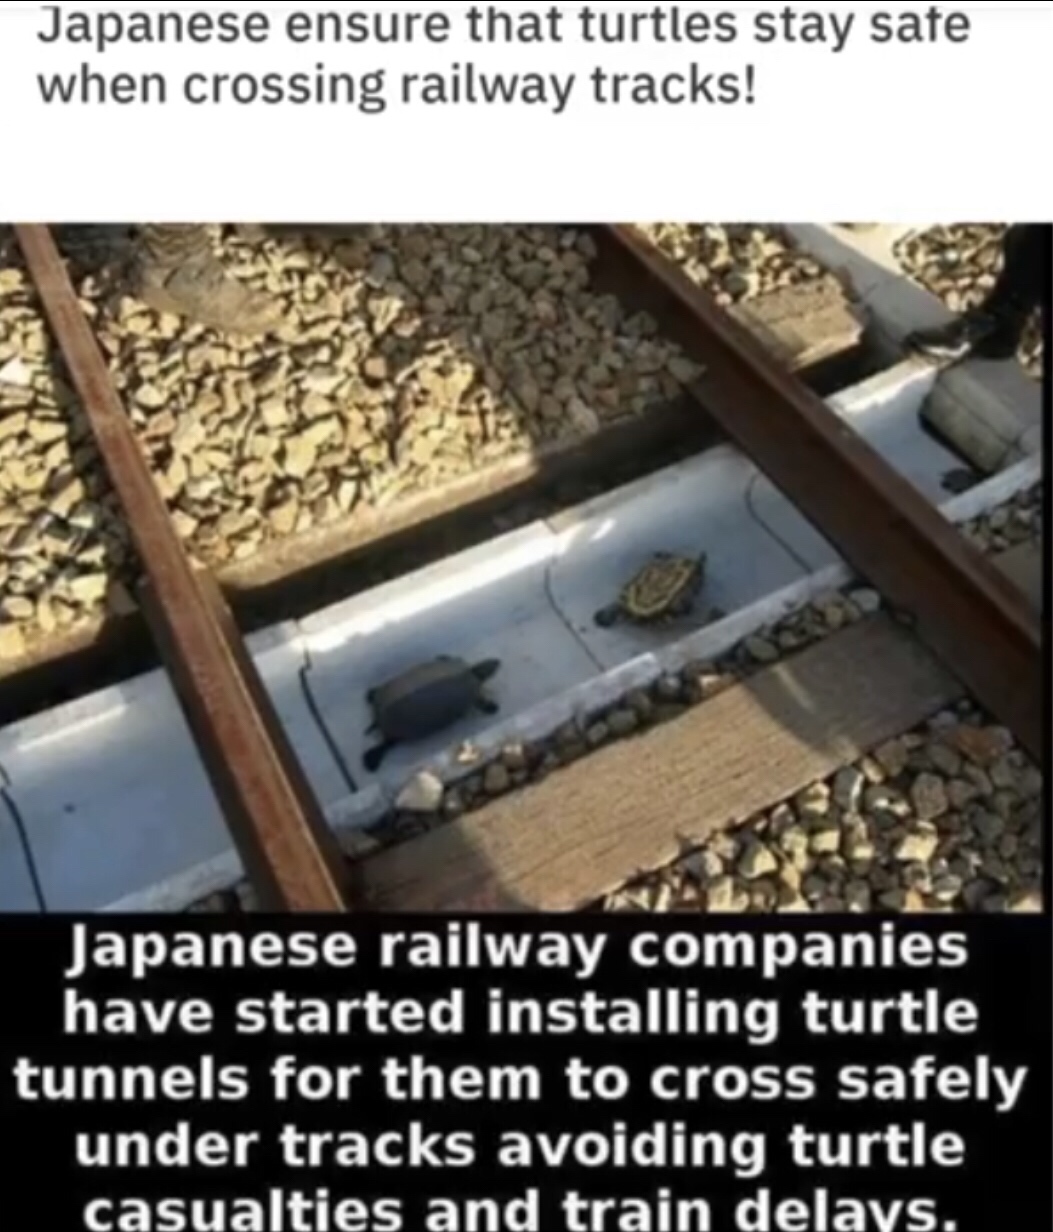 turtle tunnels in japan - Japanese ensure that turtles stay safe when crossing railway tracks! Japanese railway companies have started installing turtle tunnels for them to cross safely under tracks avoiding turtle casualties and train delays.